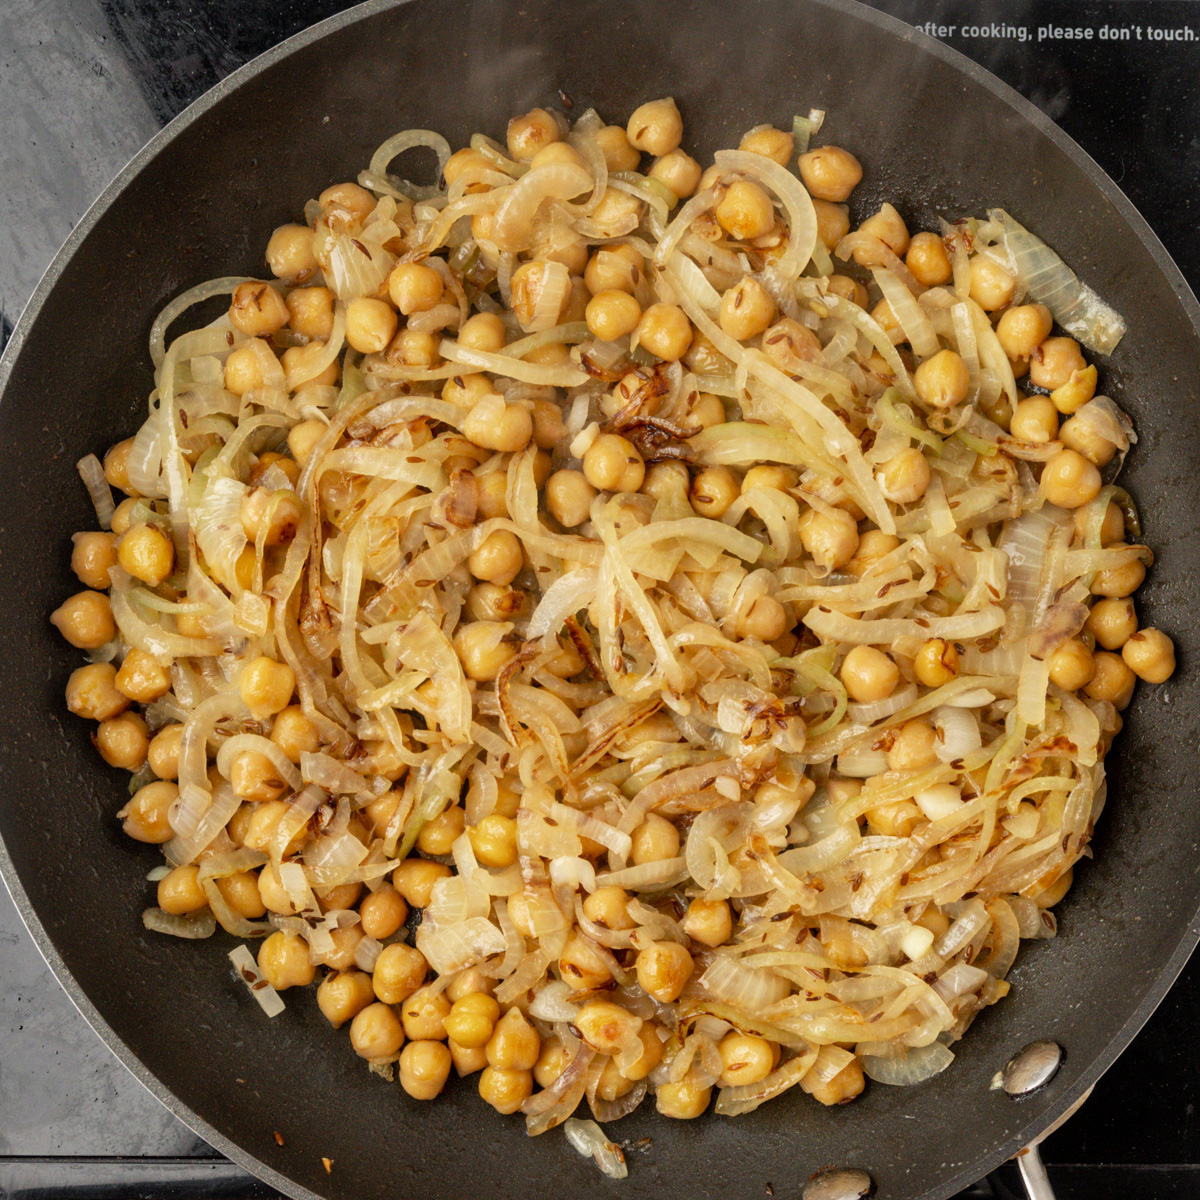 Onion and chickpeas in a skillet.